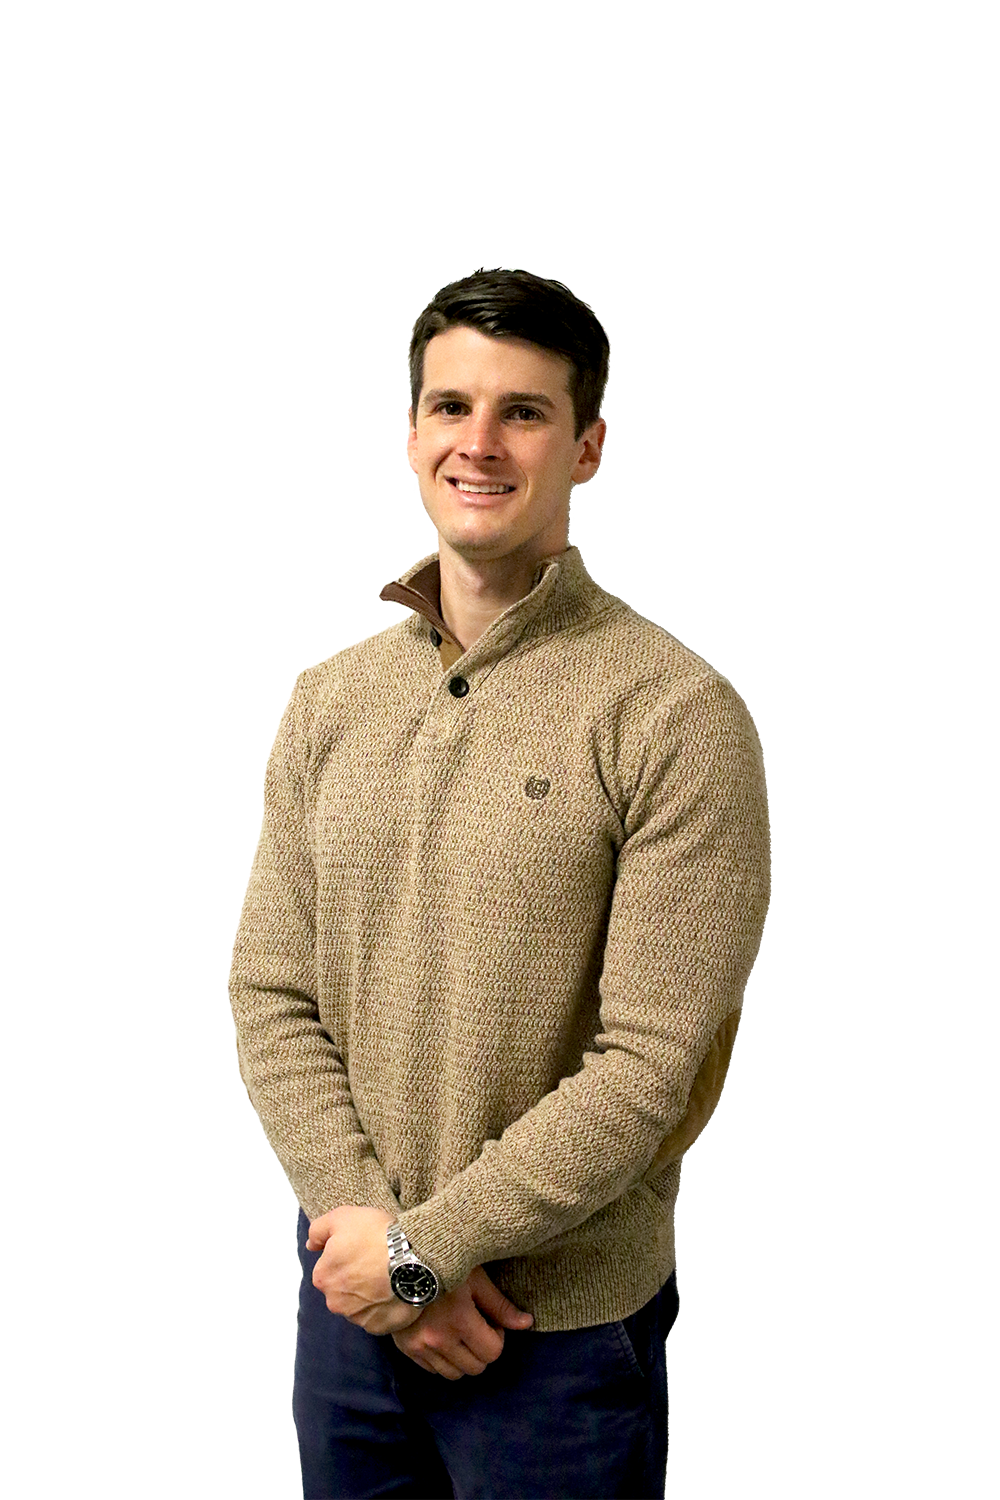 Erik Schmitt Physical Therapist & Assistant Director at Physical Therapy & Sports Medicine Centers (PTSMC) of Westbrook professional headshot